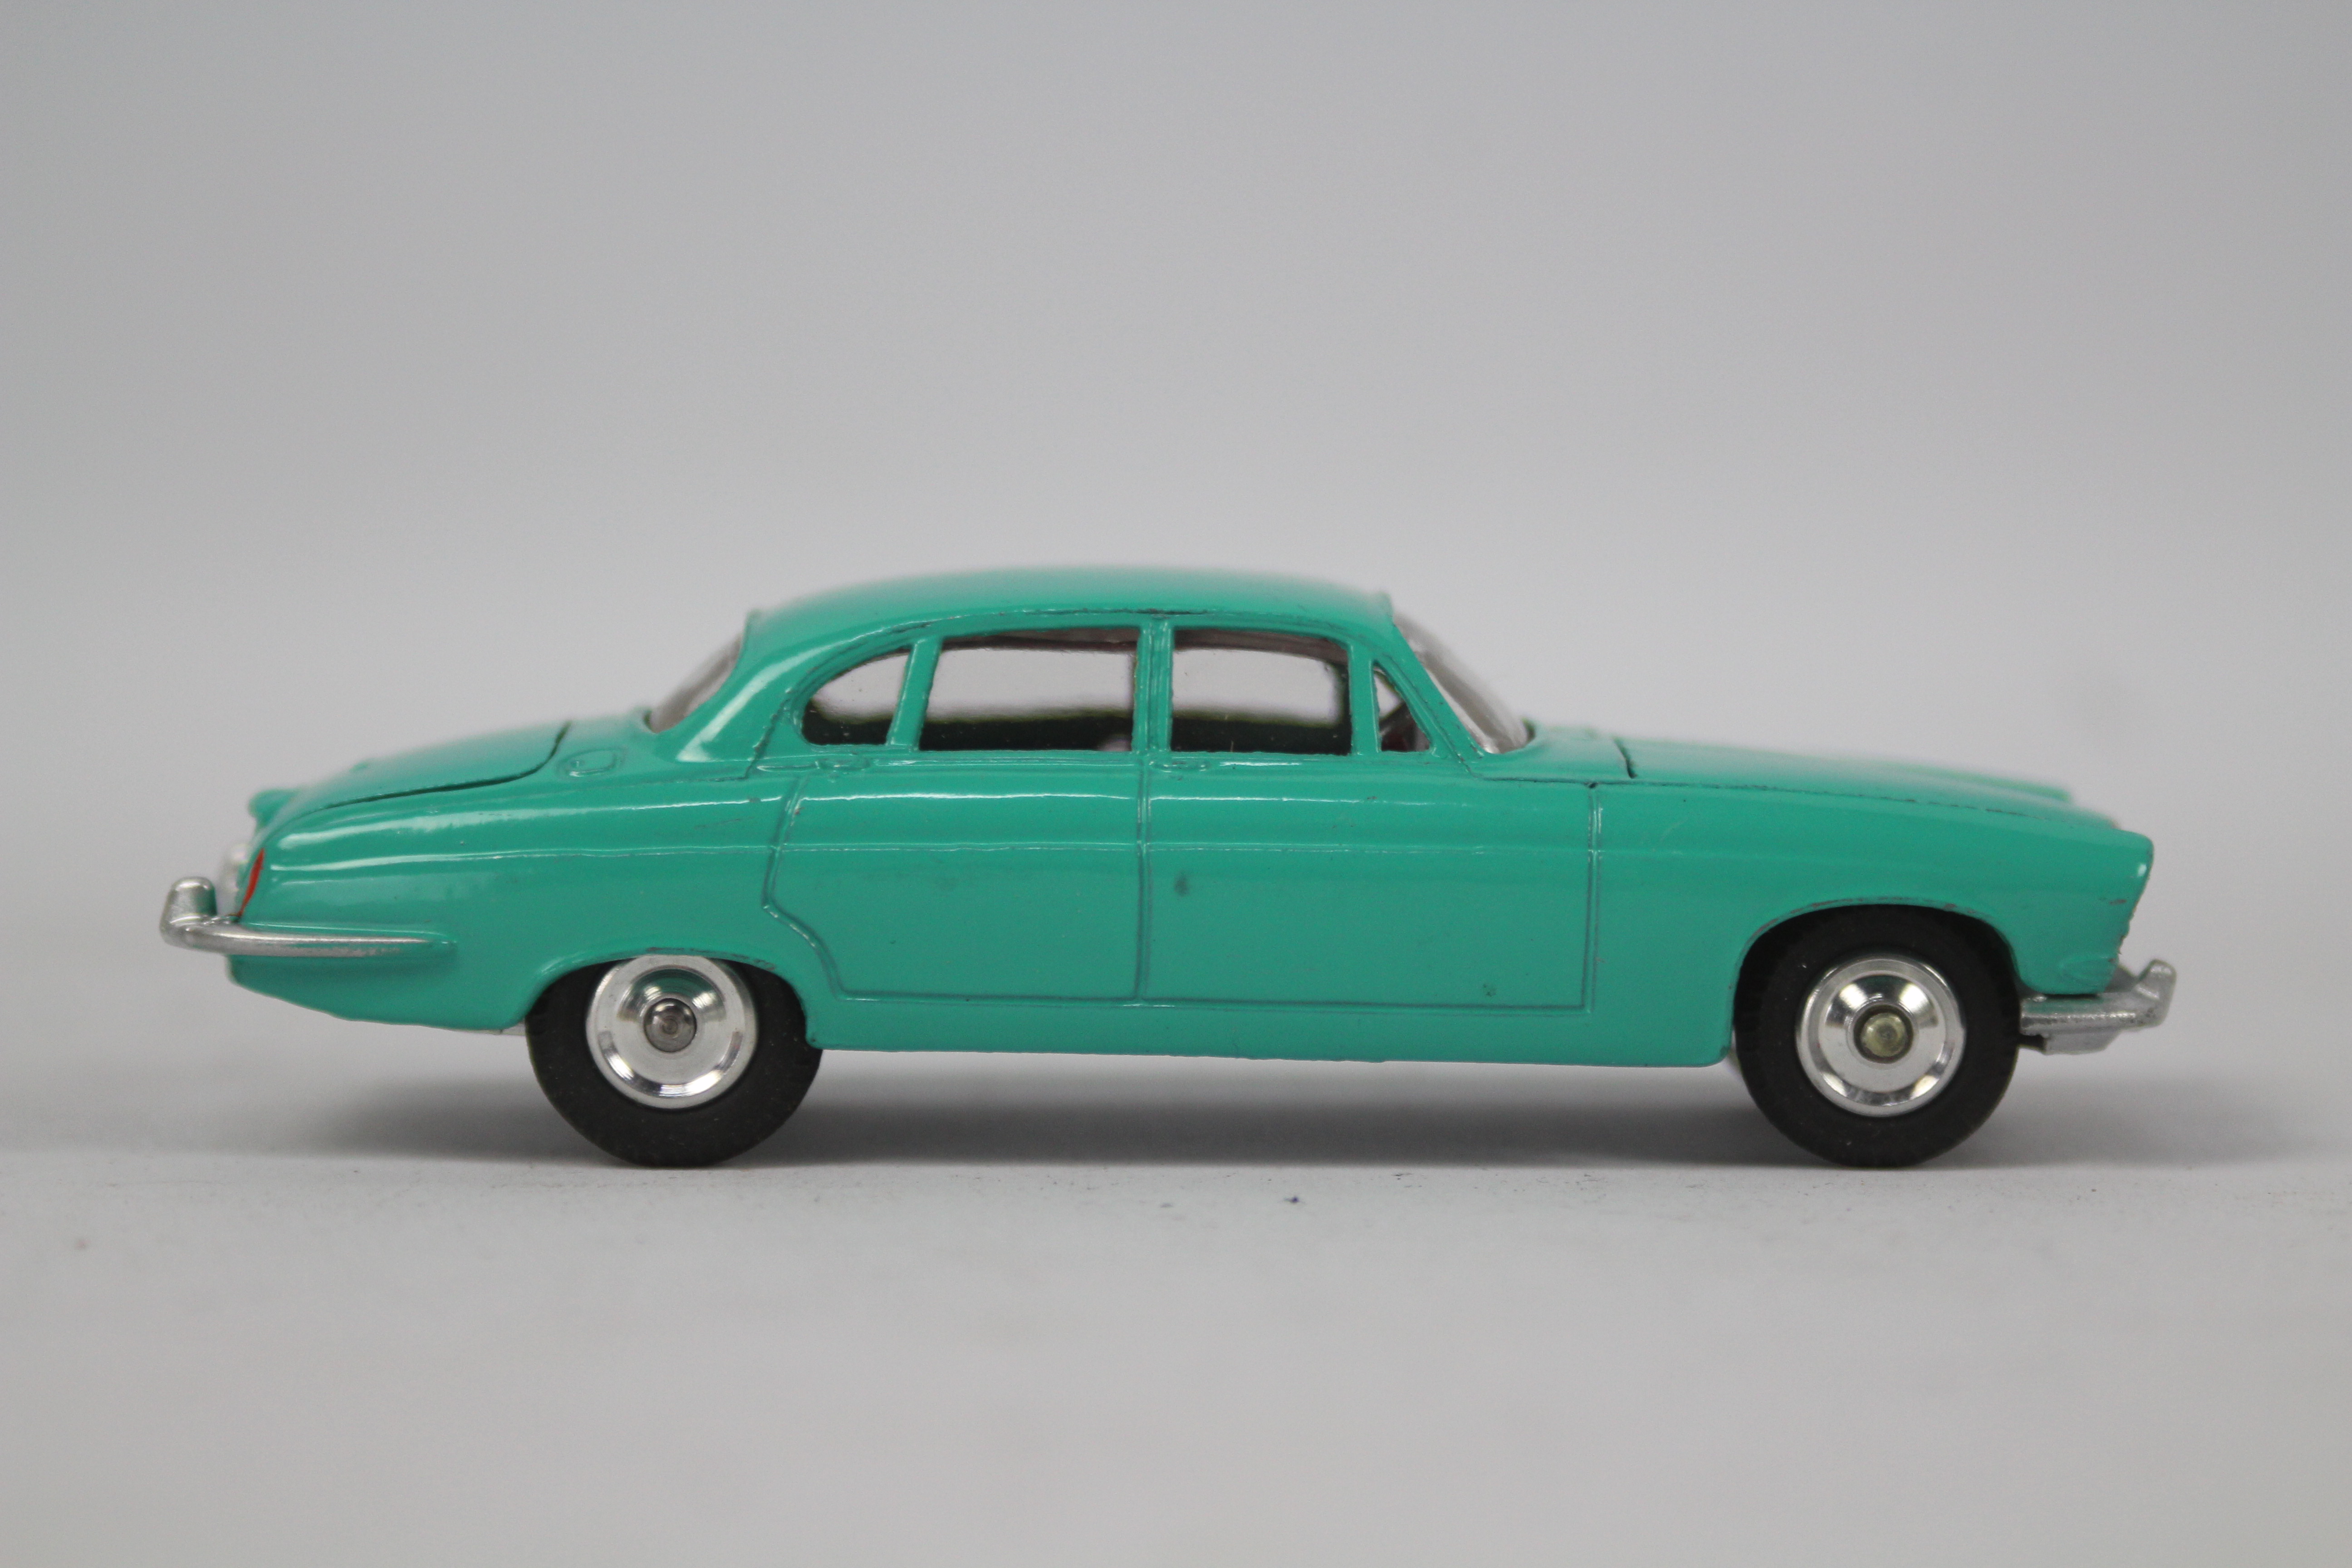 Corgi - Jaguar MkX, sea green body with red interior and spun hubs, luggage in trunk, - Image 3 of 6